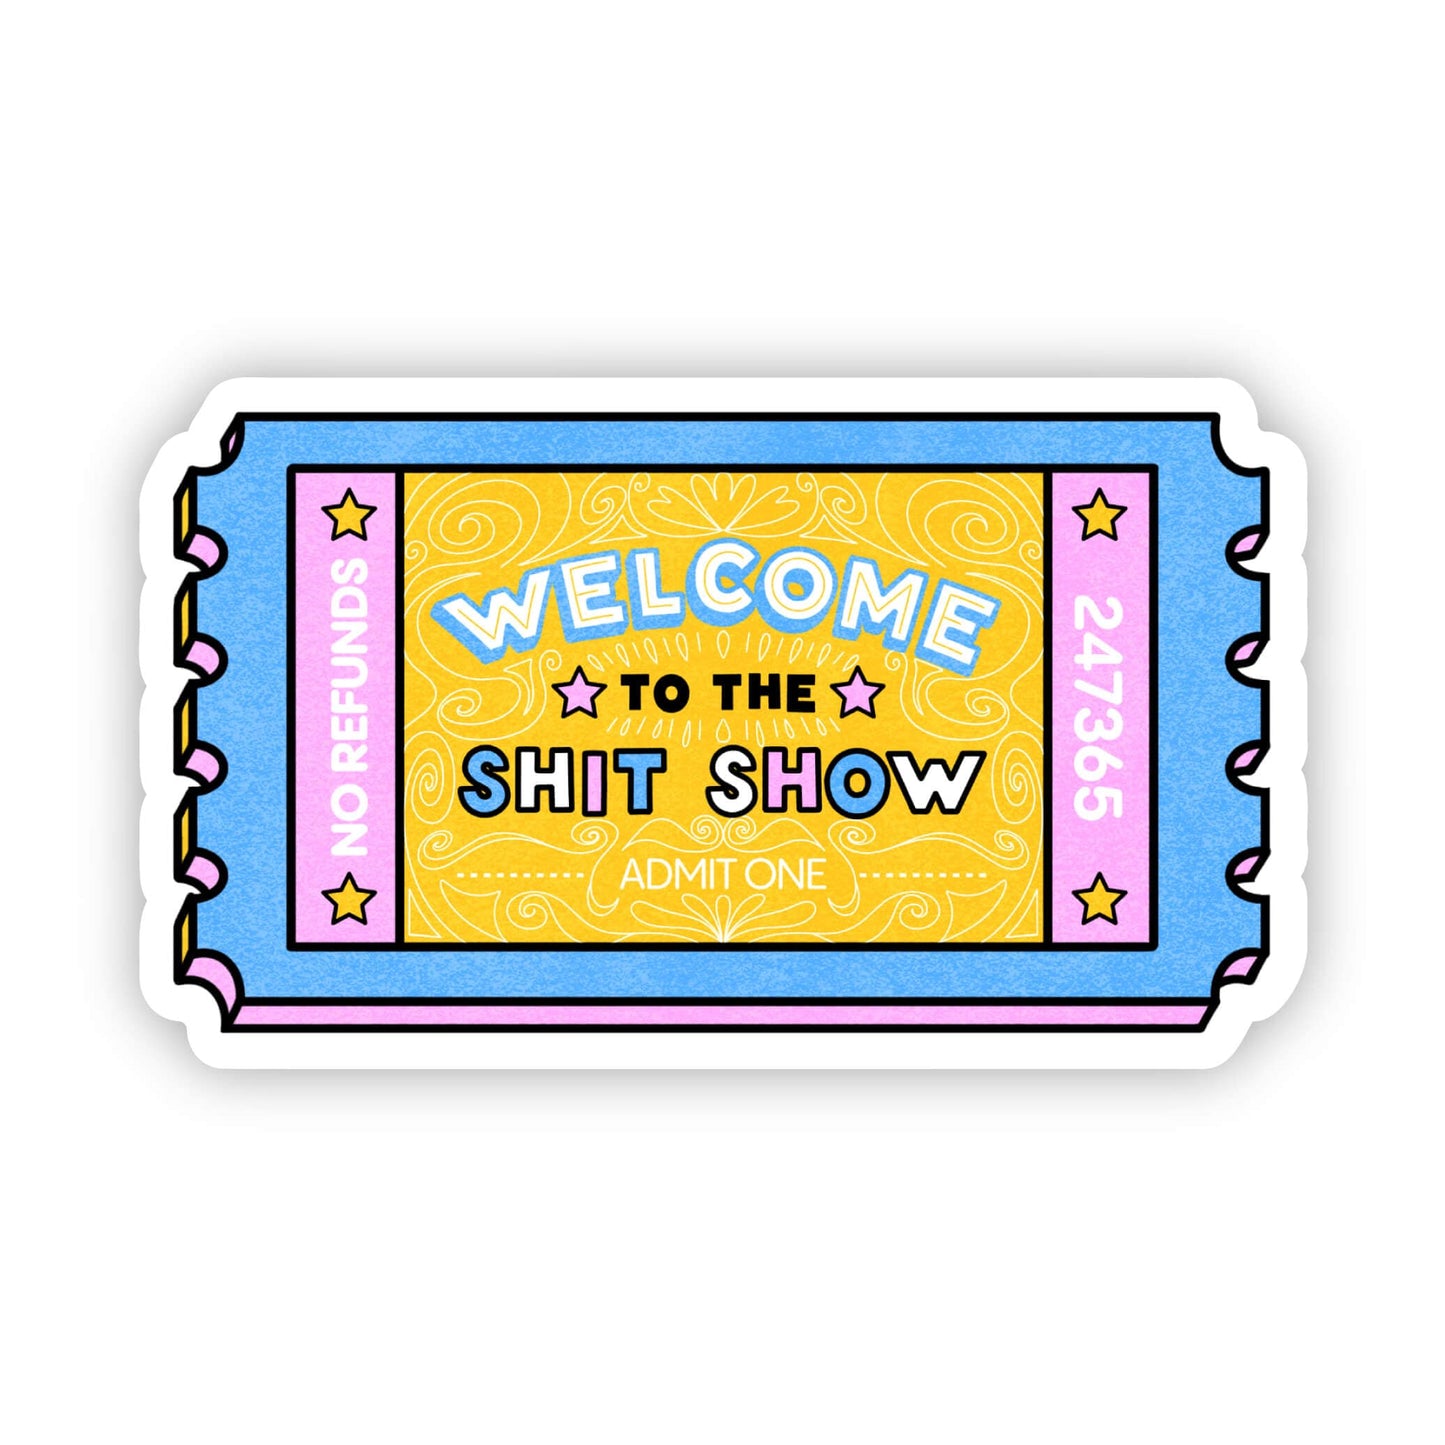 Sticker-Social-06: "Welcome To The Sh*T Show